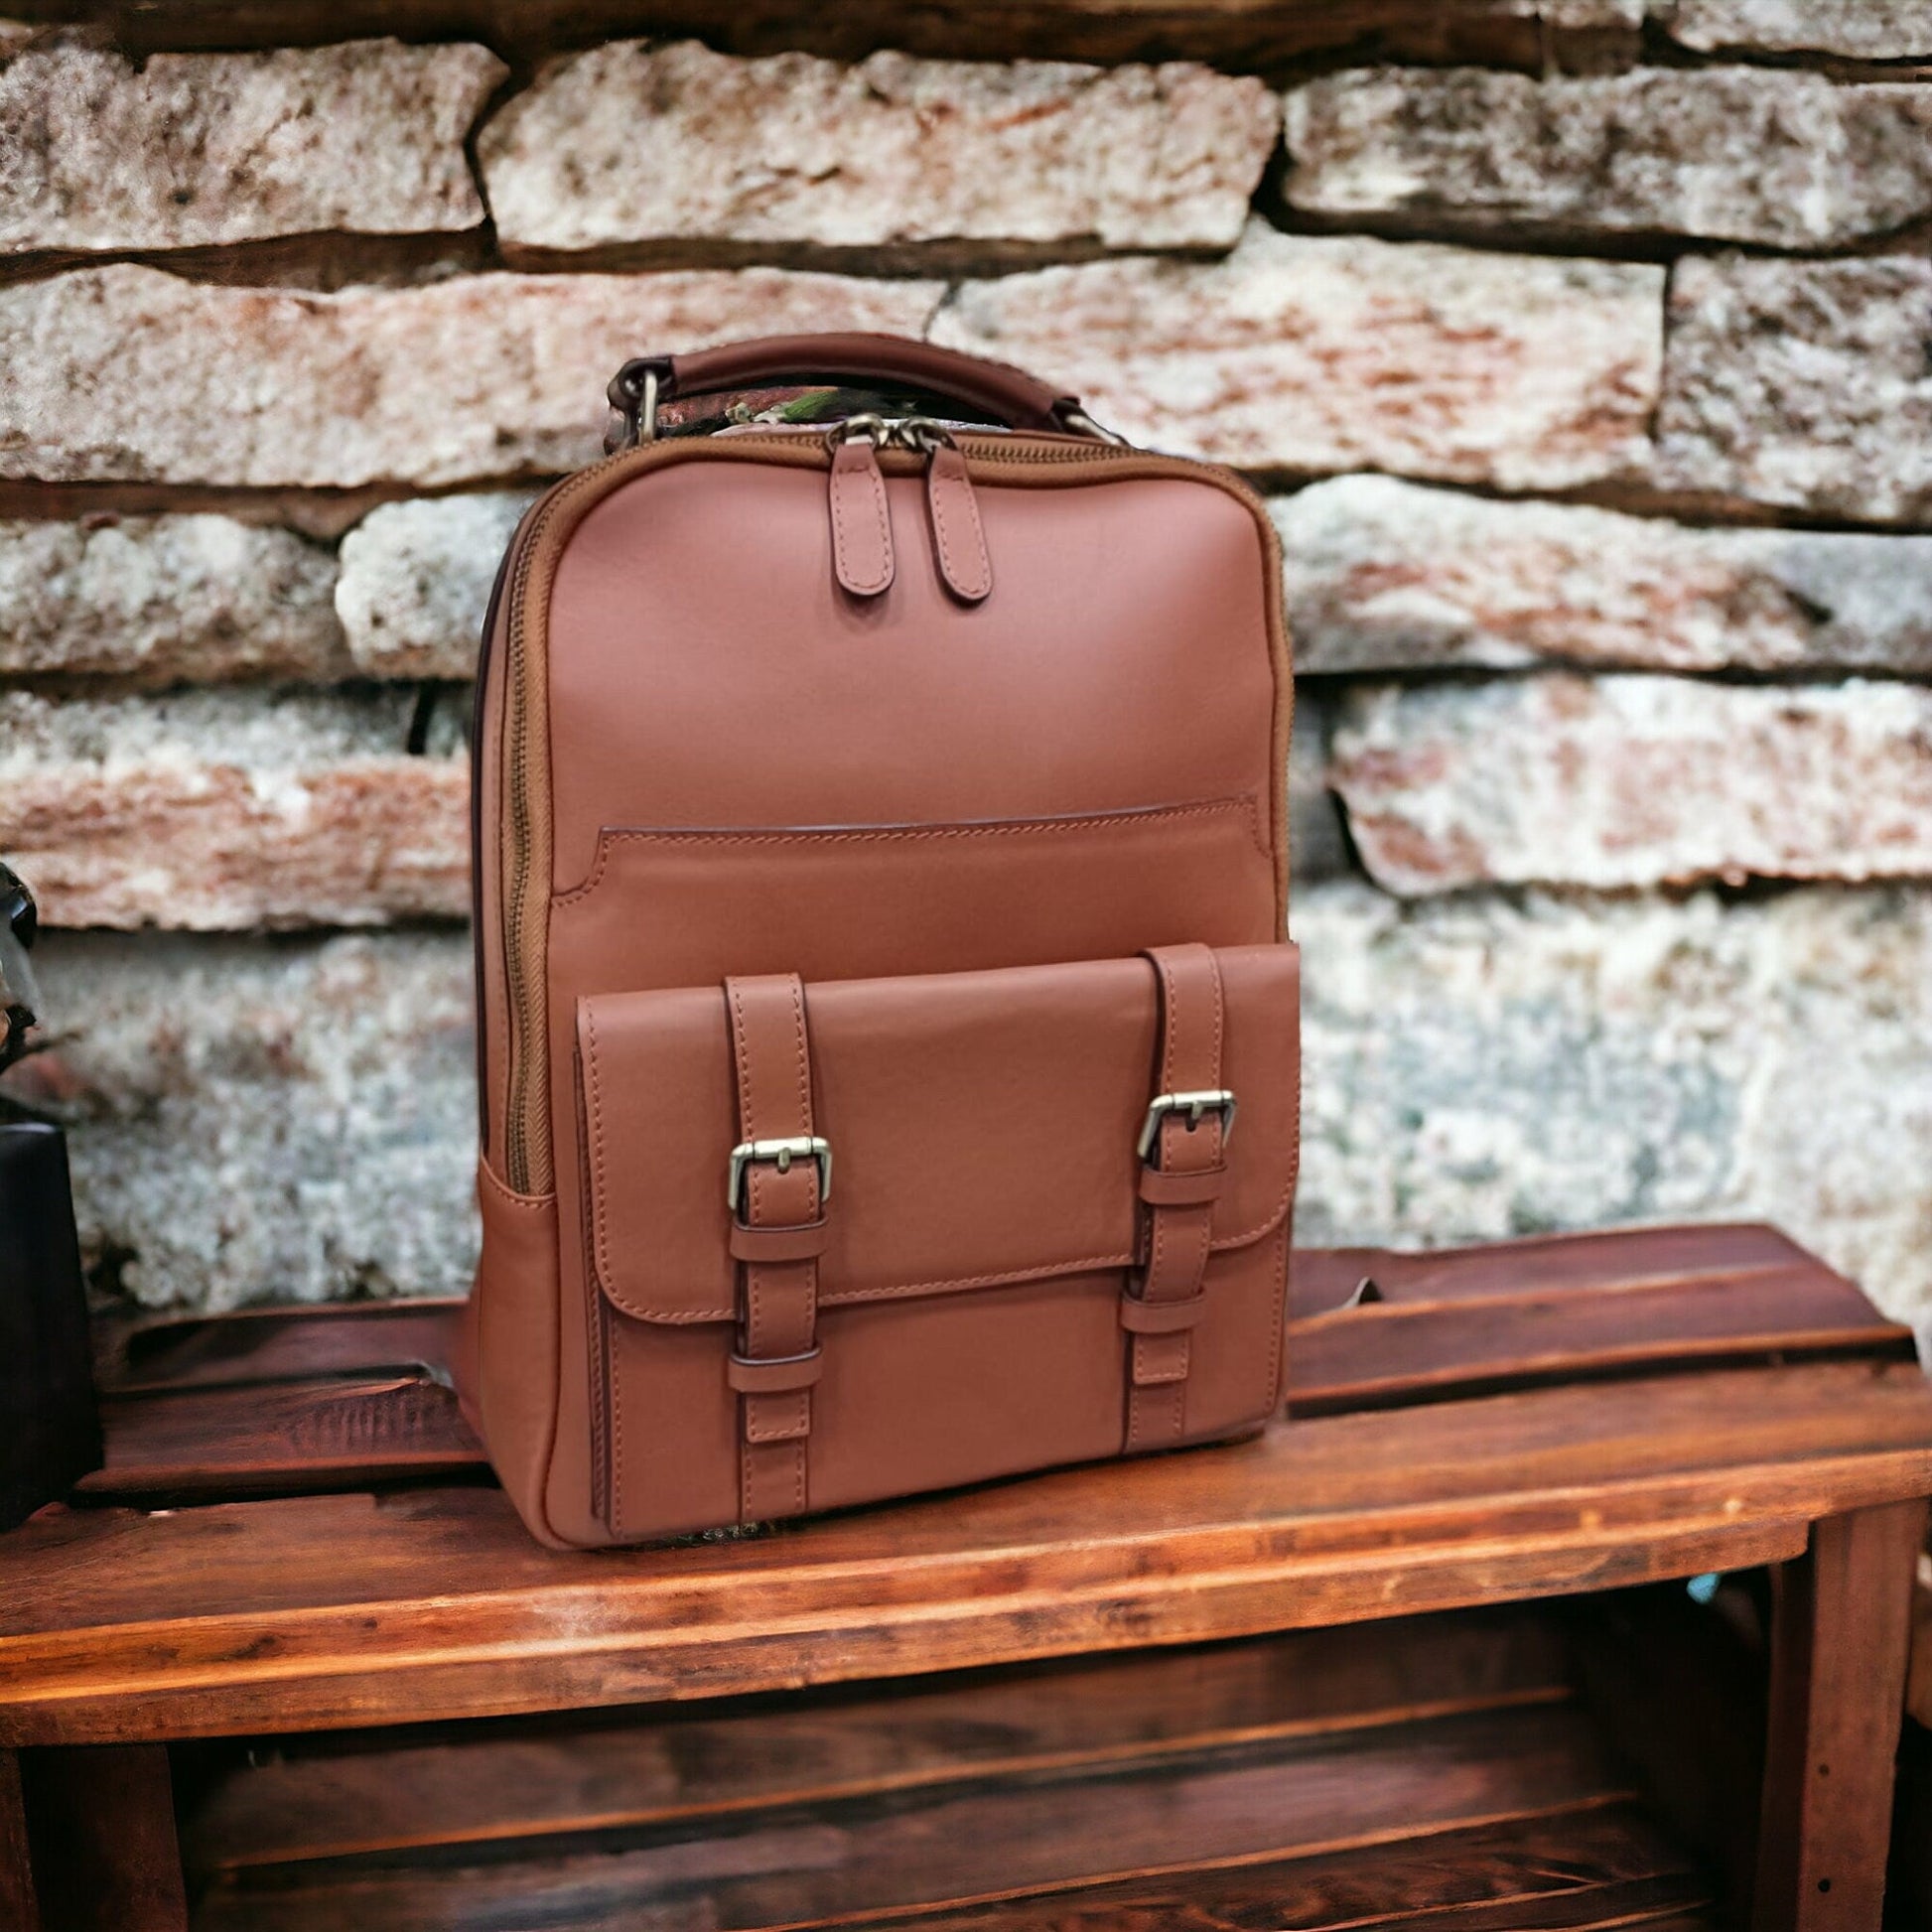 Brown,Tan,Black, Blue color | Full Leather Handmade Daypack | 20L - 30 L options  |  Laptop pocket premimum leather, Citypack, Daily use  99percenthandmade   